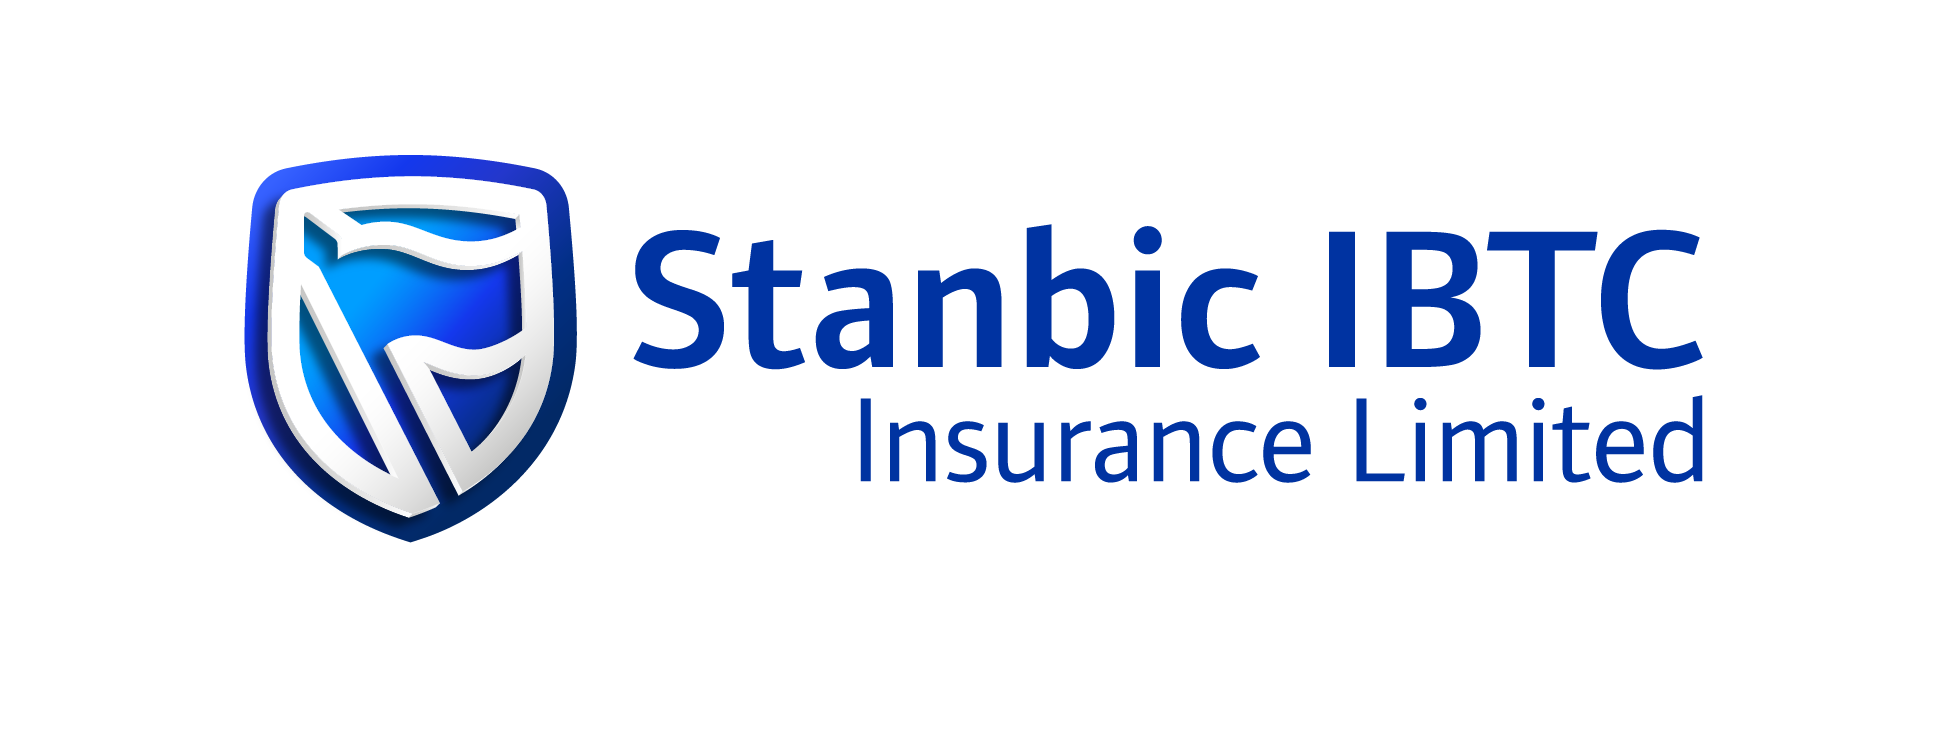 “Stanbic IBTC Insurance Highlights Benefits of Life Insurance Policy”